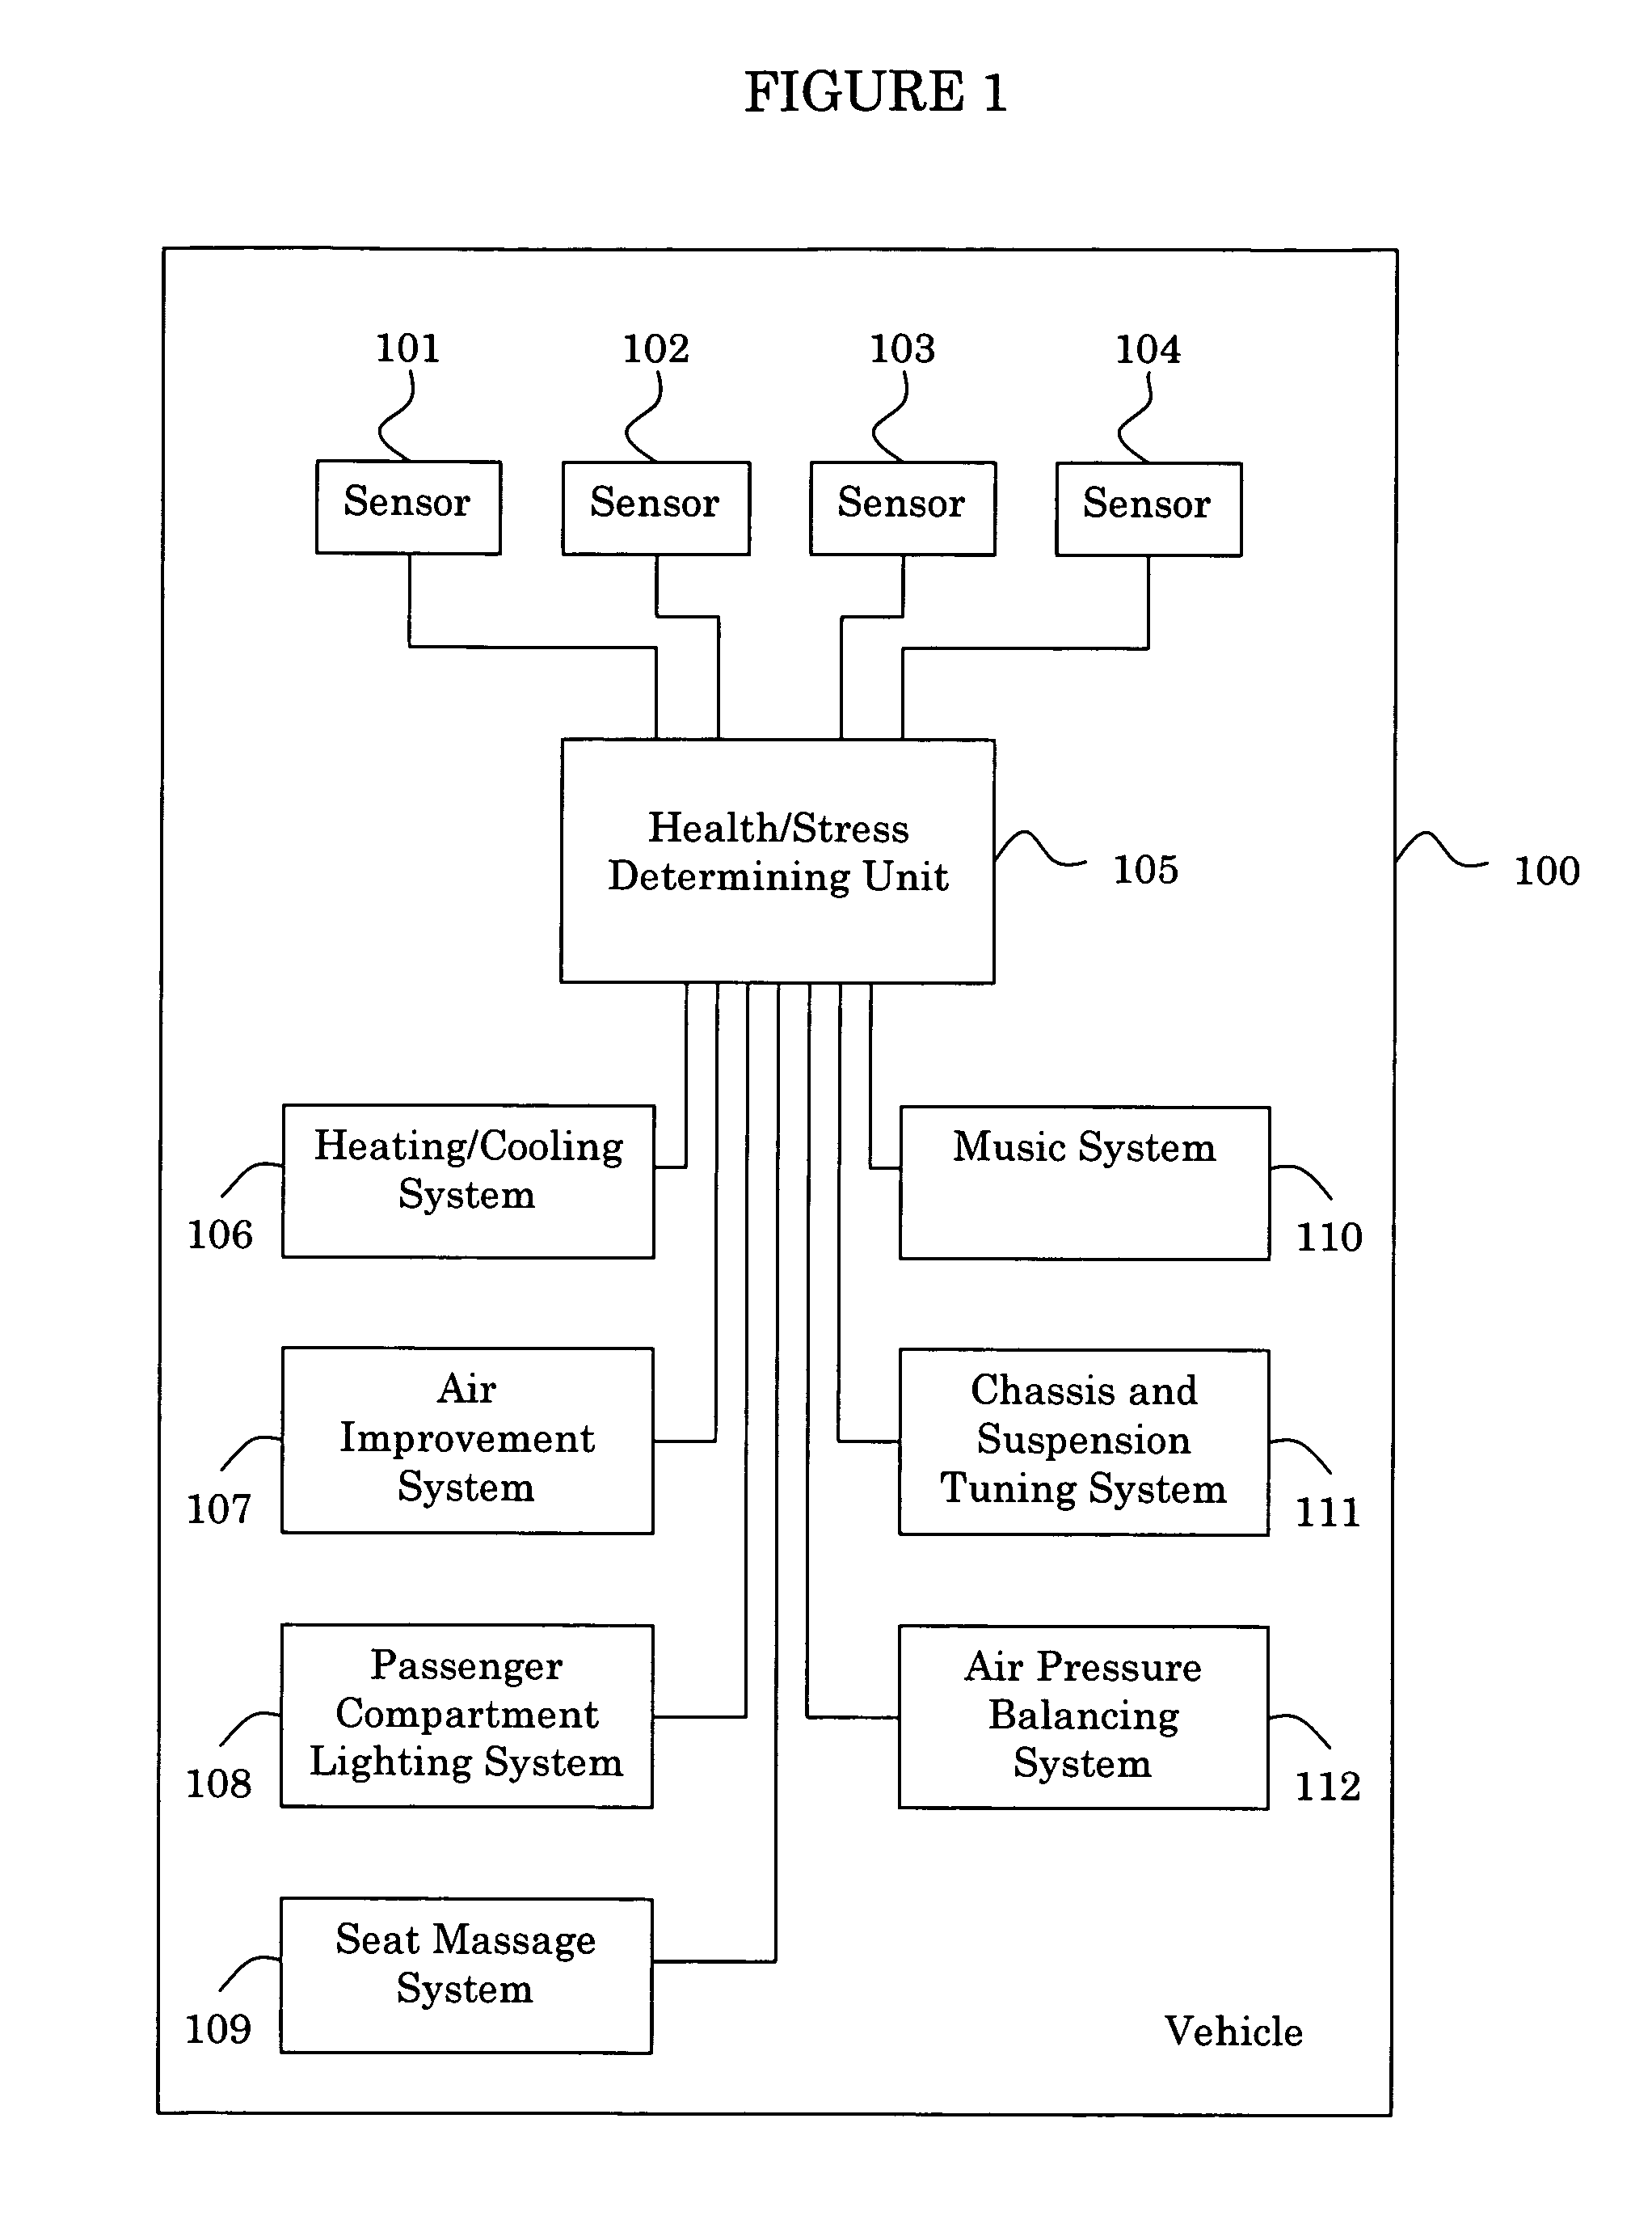 Operating method for vehicles